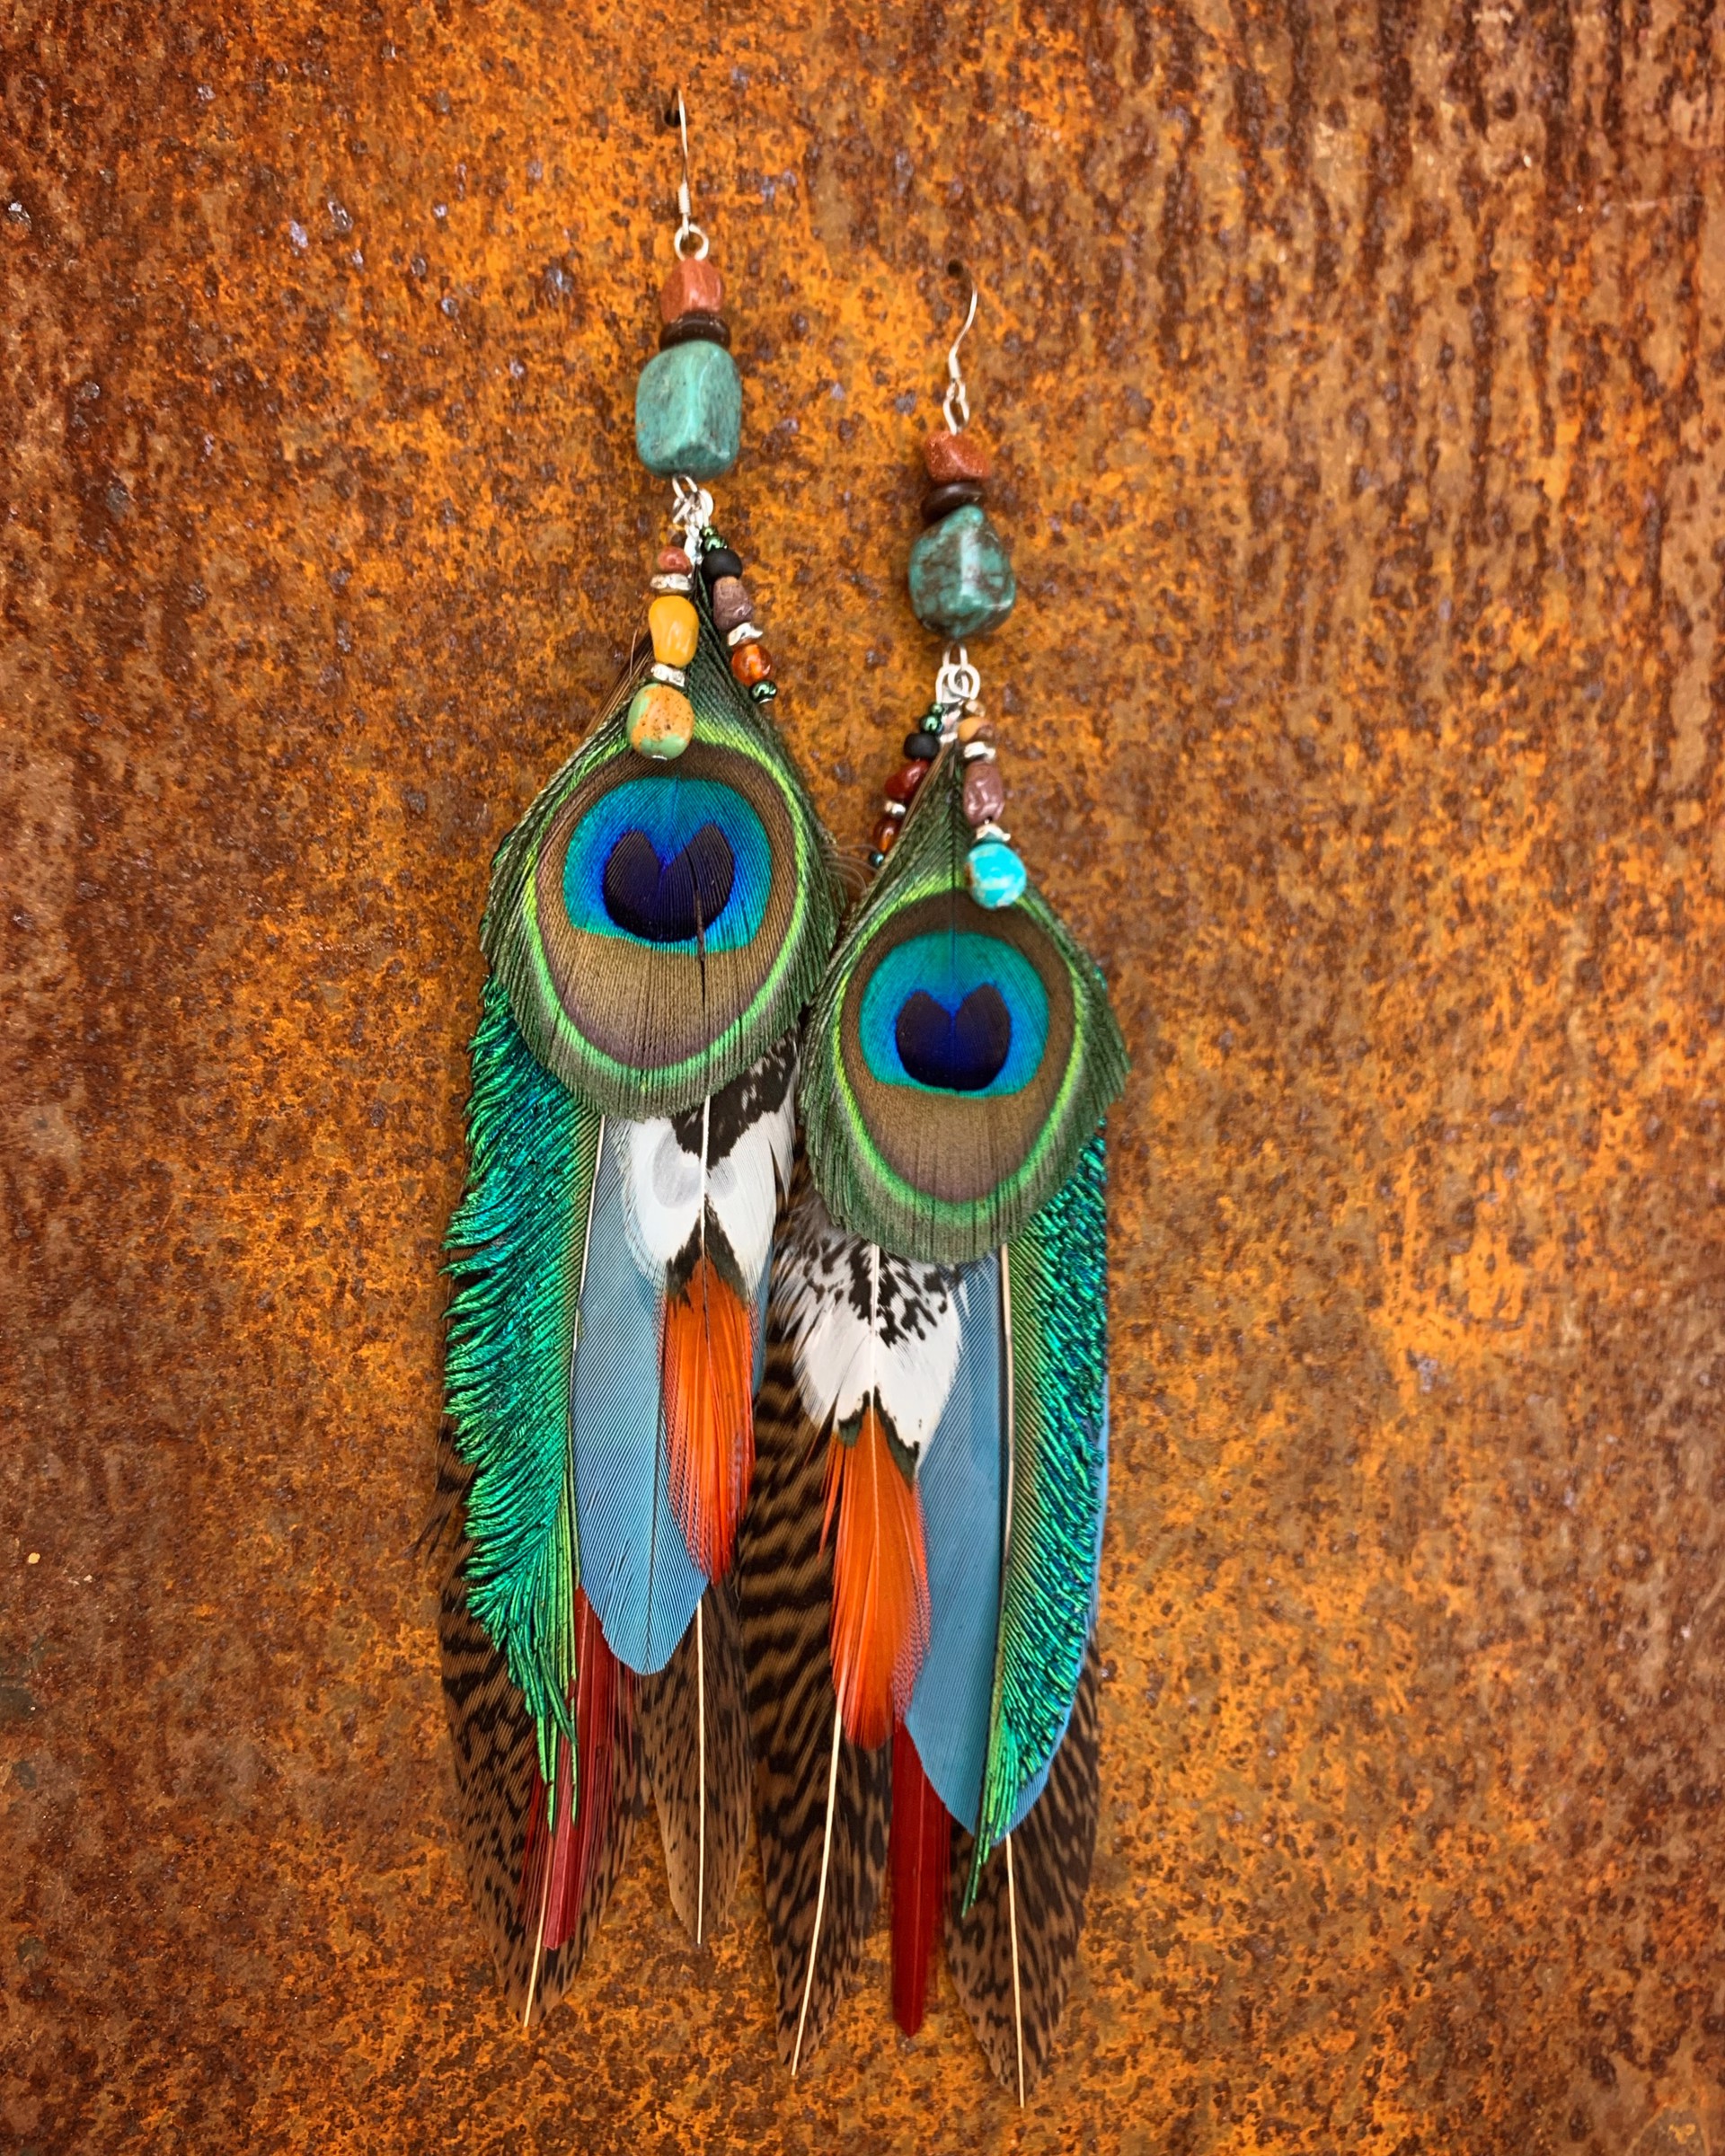 K554 Parrot and Peacock Earrings by Kelly Ormsby